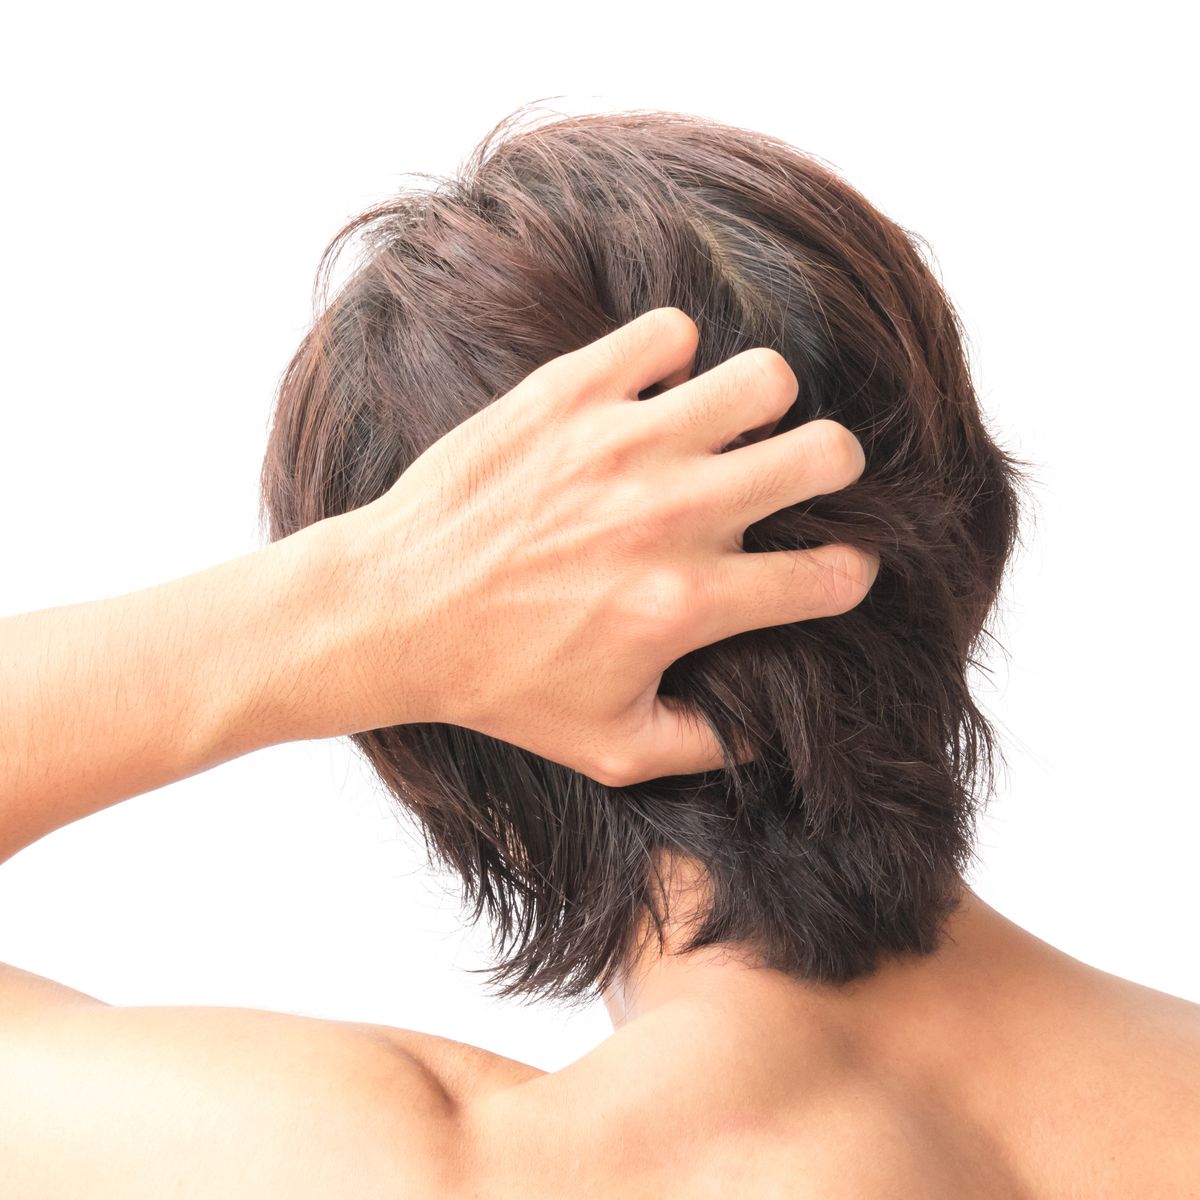 Rear View Of Man Touching Hair Over White Background